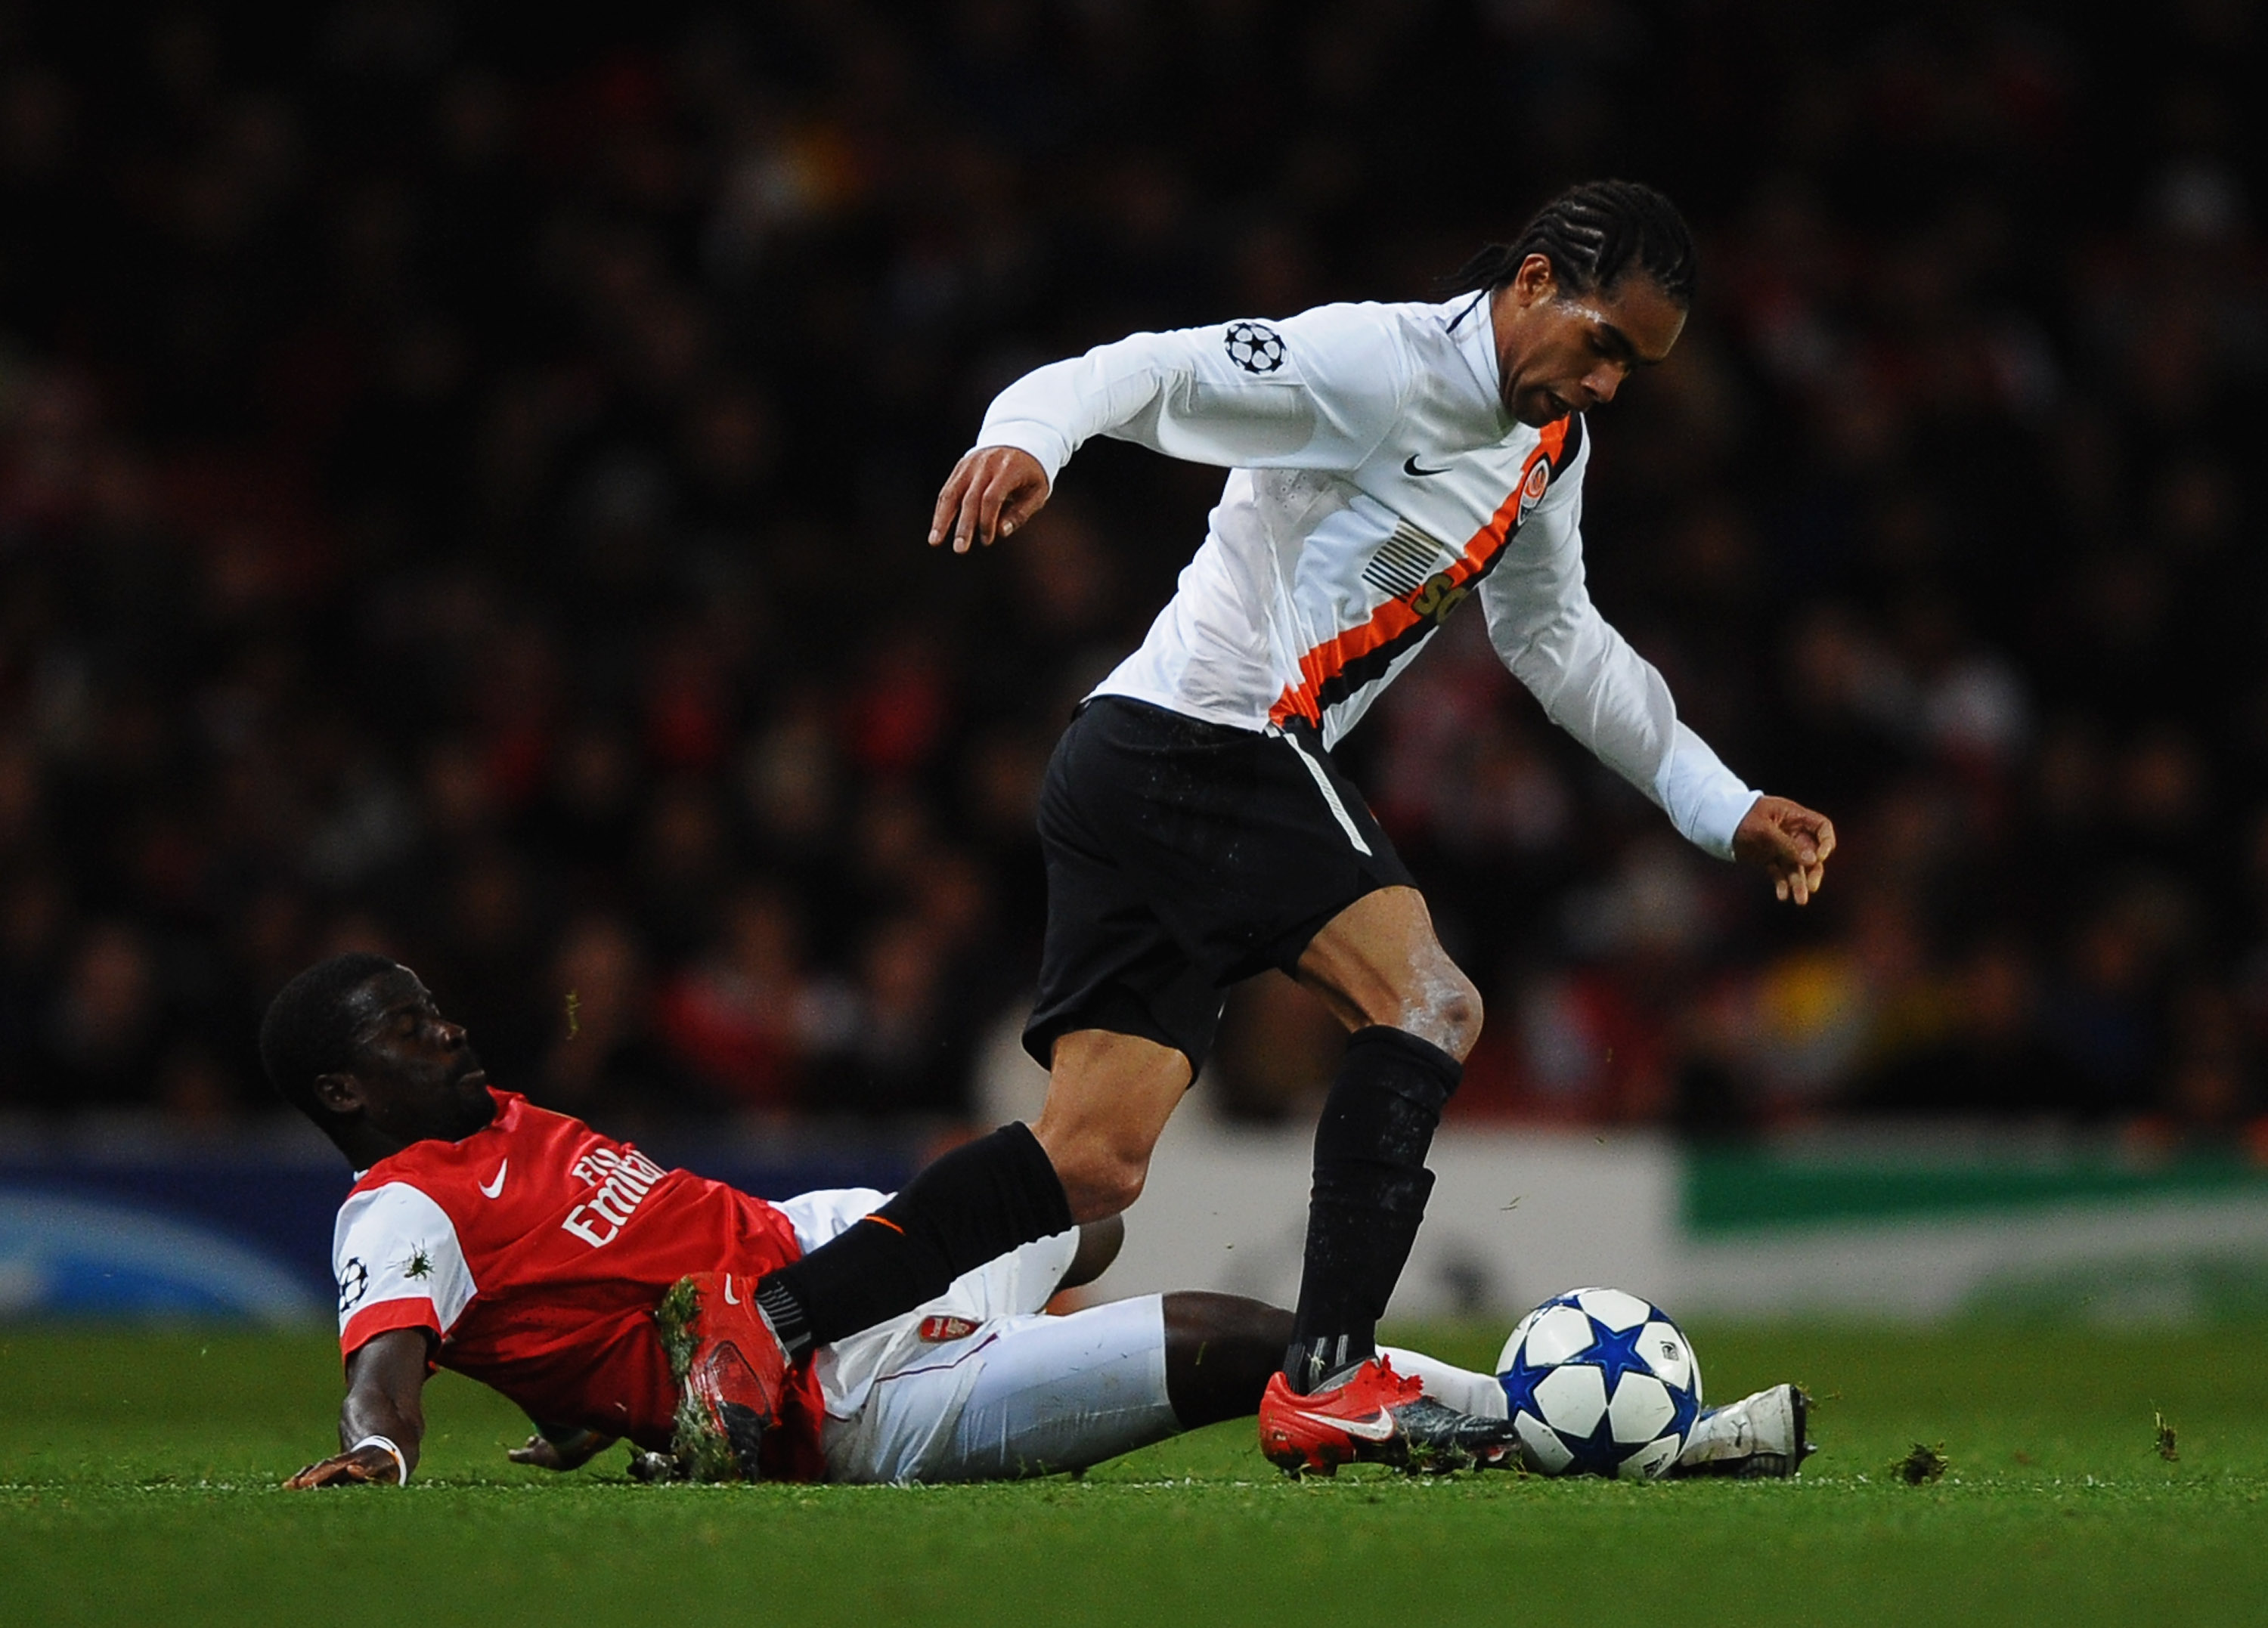 LONDON, ENGLAND - OCTOBER 19:  Alex Teixeira of Shakhtar Donetsk takes on Emmanuel Eboue of Arsenal during the UEFA Champions League Group H match between Arsenal and FC Shakhtar Donetsk at the Emirates Stadium on October 19, 2010 in London, England.  (Ph